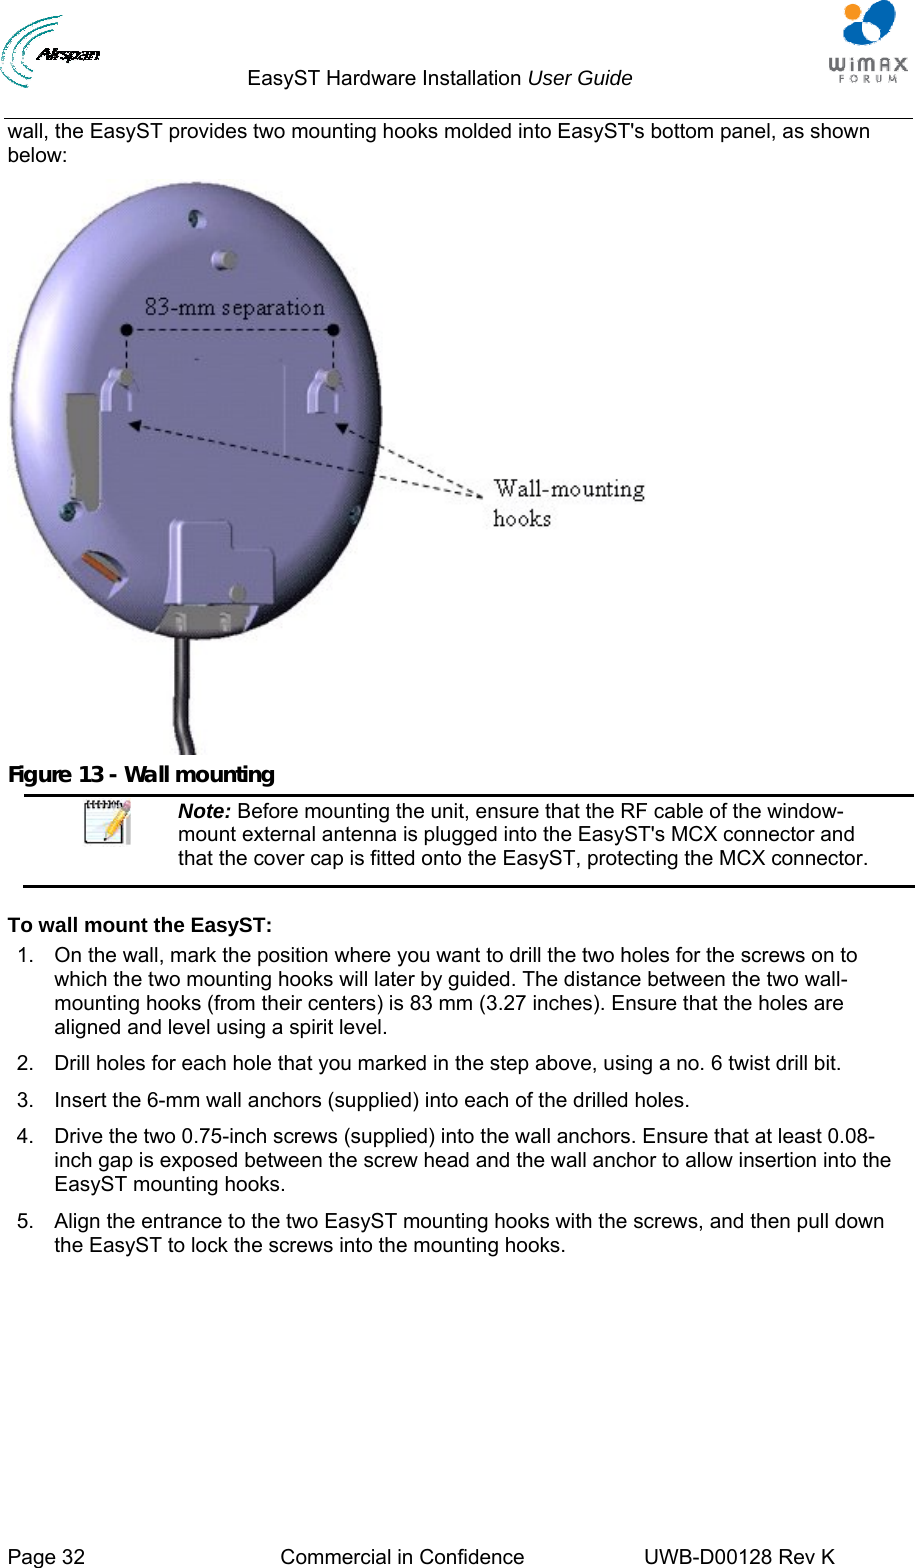                                  EasyST Hardware Installation User Guide     Page 32  Commercial in Confidence  UWB-D00128 Rev K   wall, the EasyST provides two mounting hooks molded into EasyST&apos;s bottom panel, as shown below:  Figure 13 - Wall mounting  Note: Before mounting the unit, ensure that the RF cable of the window-mount external antenna is plugged into the EasyST&apos;s MCX connector and that the cover cap is fitted onto the EasyST, protecting the MCX connector.  To wall mount the EasyST: 1.  On the wall, mark the position where you want to drill the two holes for the screws on to which the two mounting hooks will later by guided. The distance between the two wall-mounting hooks (from their centers) is 83 mm (3.27 inches). Ensure that the holes are aligned and level using a spirit level. 2.  Drill holes for each hole that you marked in the step above, using a no. 6 twist drill bit. 3.  Insert the 6-mm wall anchors (supplied) into each of the drilled holes. 4.  Drive the two 0.75-inch screws (supplied) into the wall anchors. Ensure that at least 0.08-inch gap is exposed between the screw head and the wall anchor to allow insertion into the EasyST mounting hooks. 5.  Align the entrance to the two EasyST mounting hooks with the screws, and then pull down the EasyST to lock the screws into the mounting hooks. 